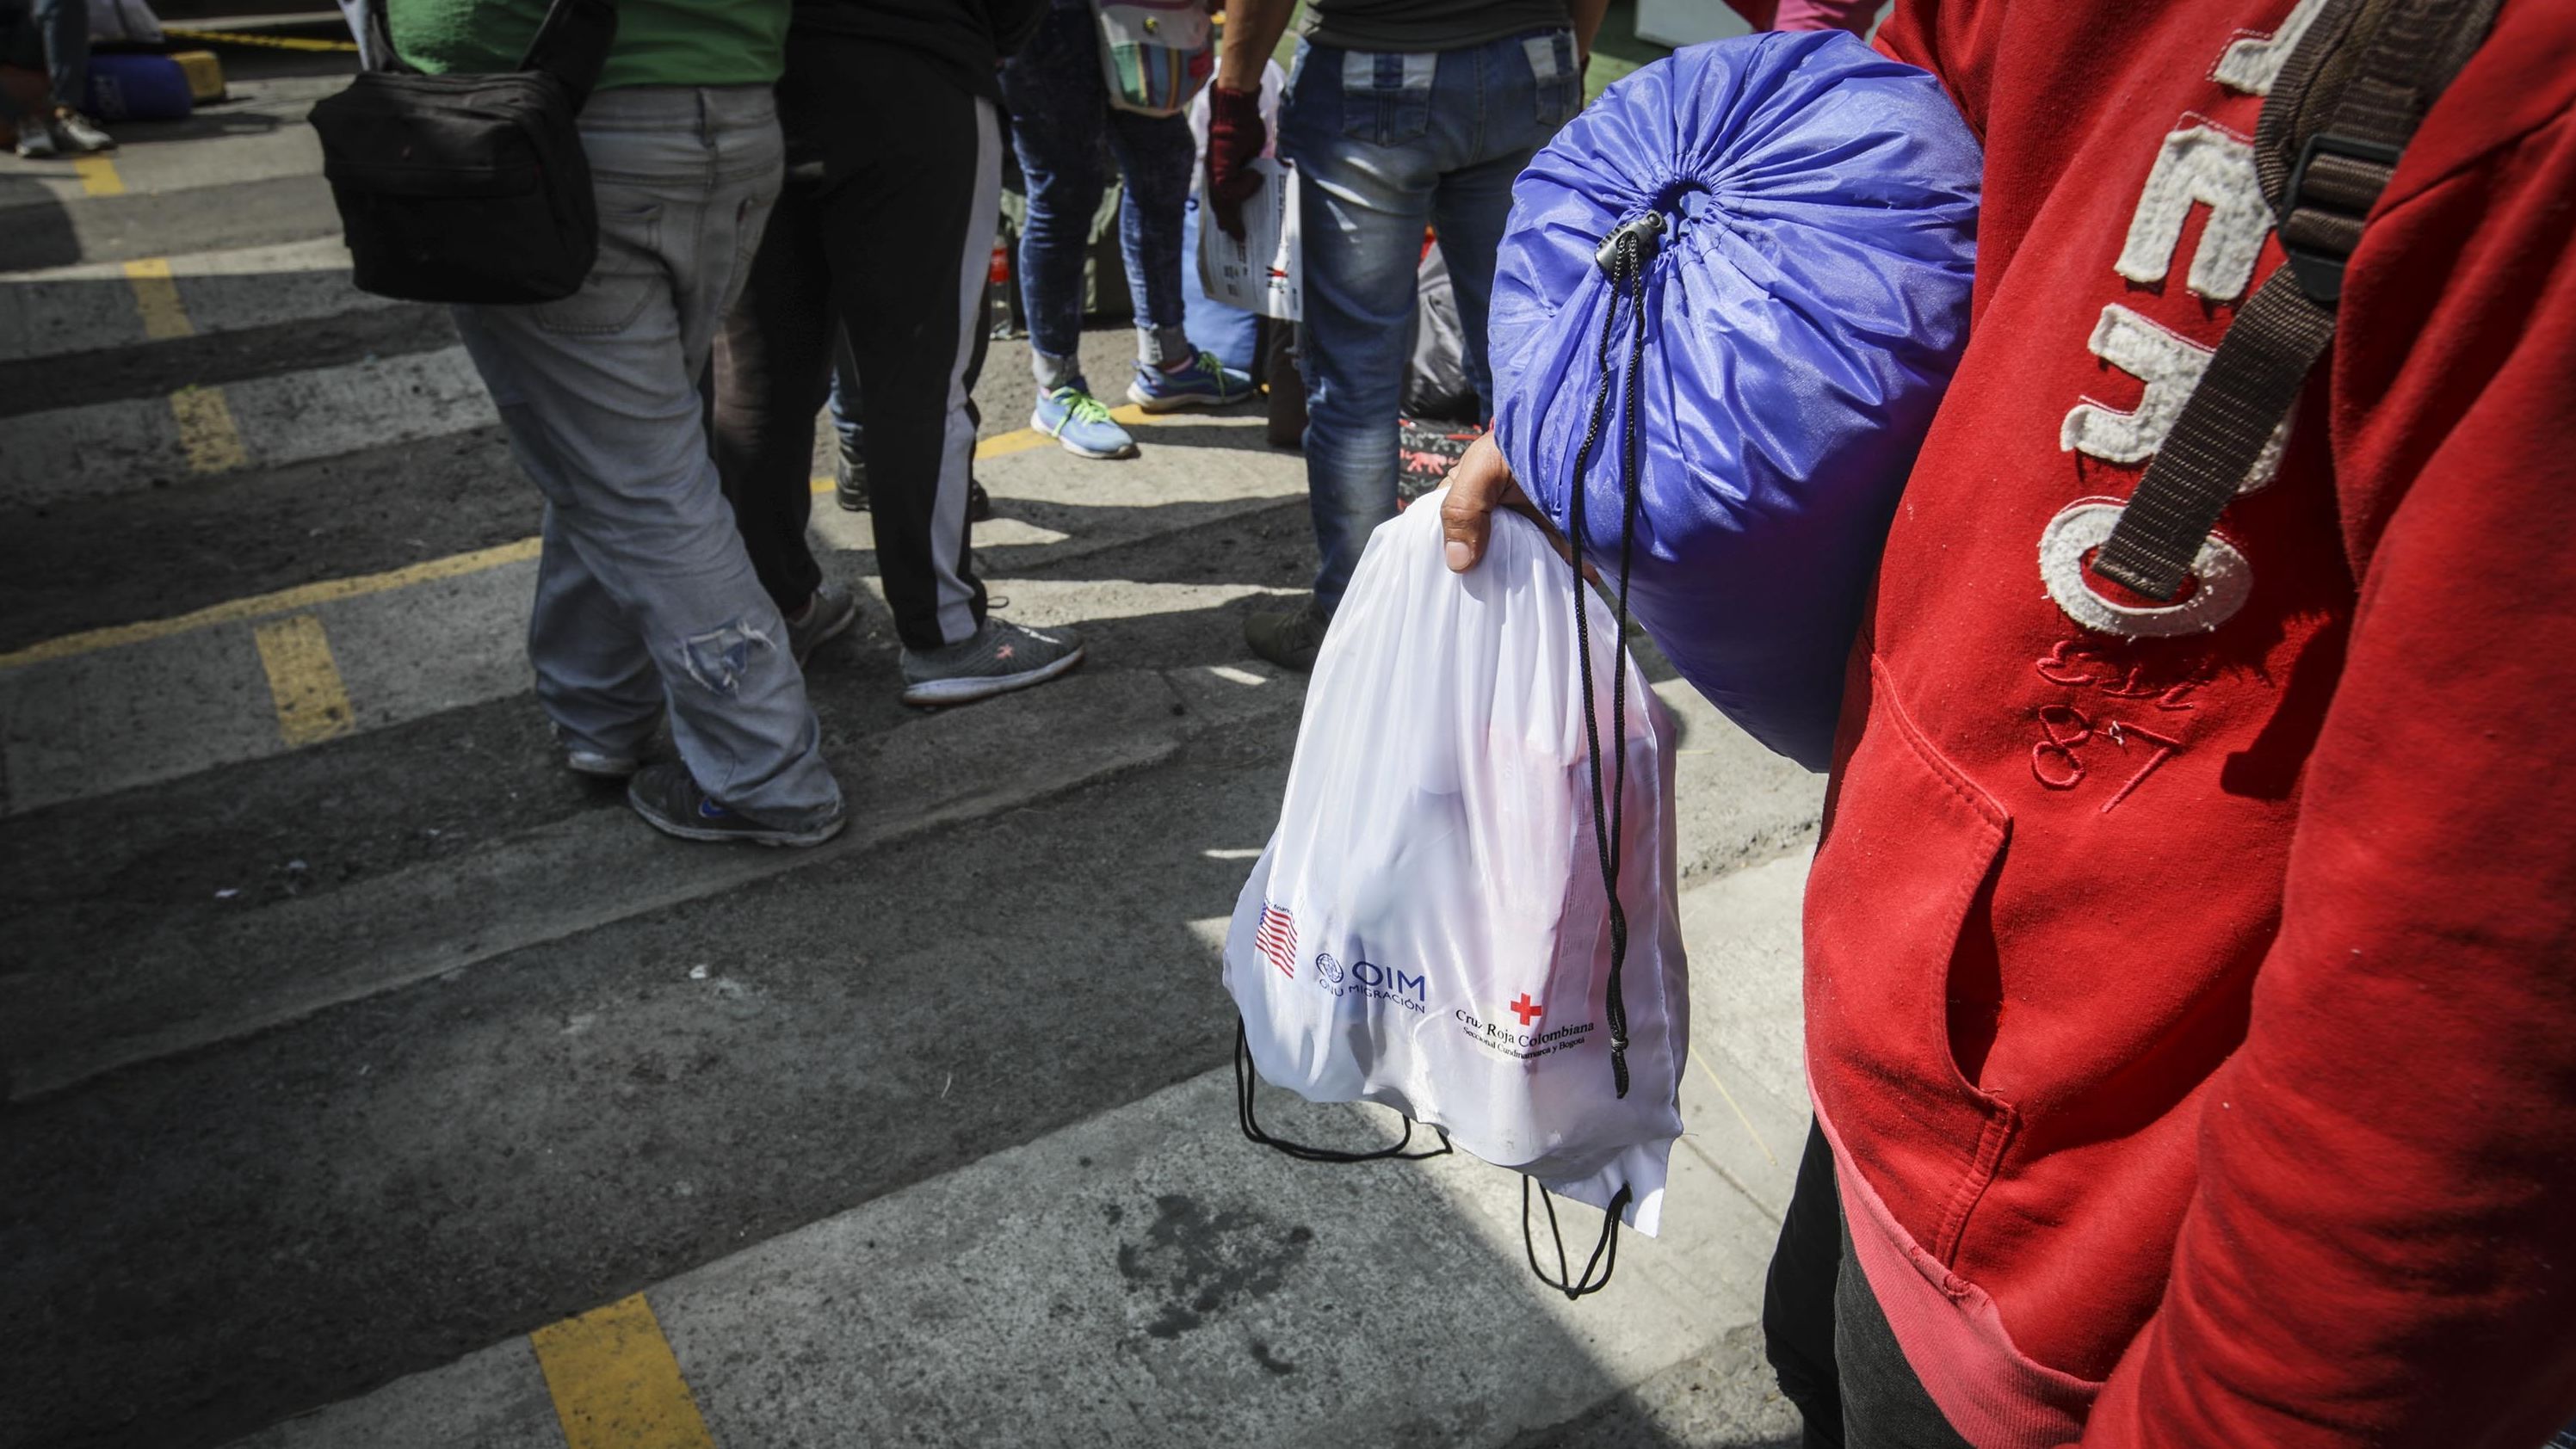 A group of Venezuelan migrants gather for food, medical aid at the International Red Cross, UN Refugee Agency, before continuing the march by foot to find countries like Ecuador, Peru, and Chile at the immigrant aid center on the roads in Sibate, Colombia on December 21, 2021.